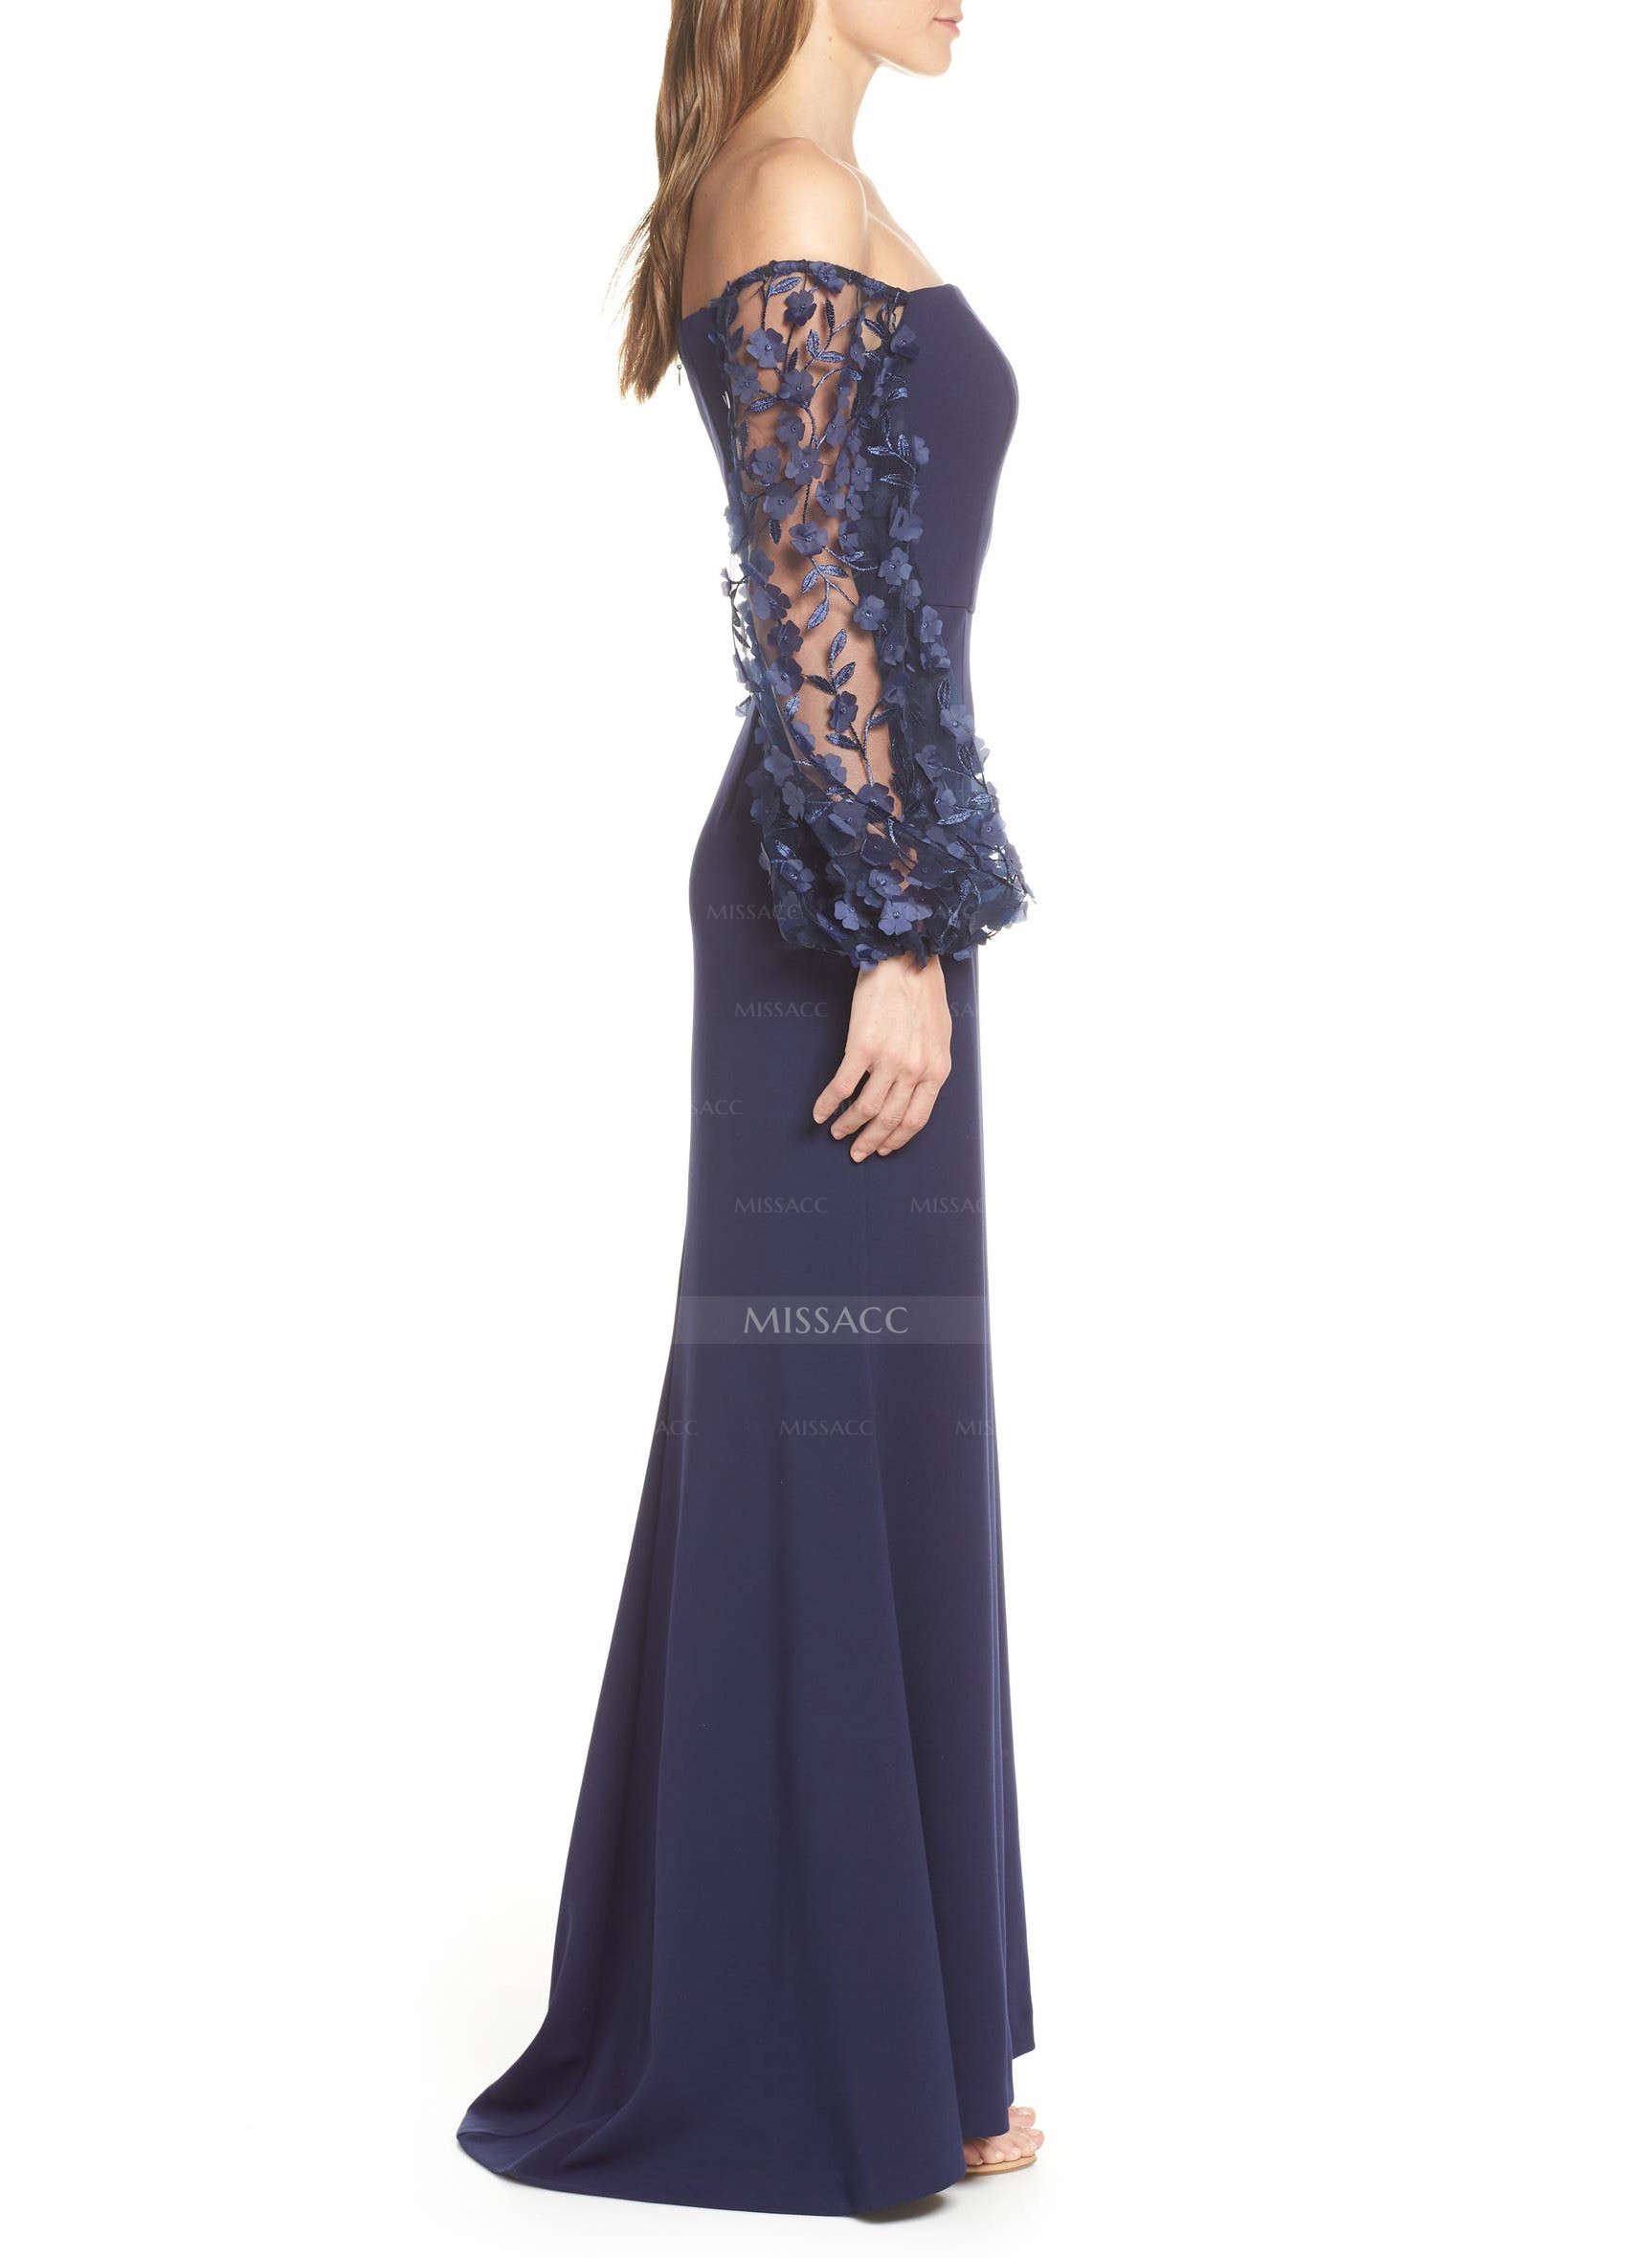 Lace Long Sleeves Off-The-Shoulder Sheath/Column Mother Of The Bride Dresses With Elastic Satin